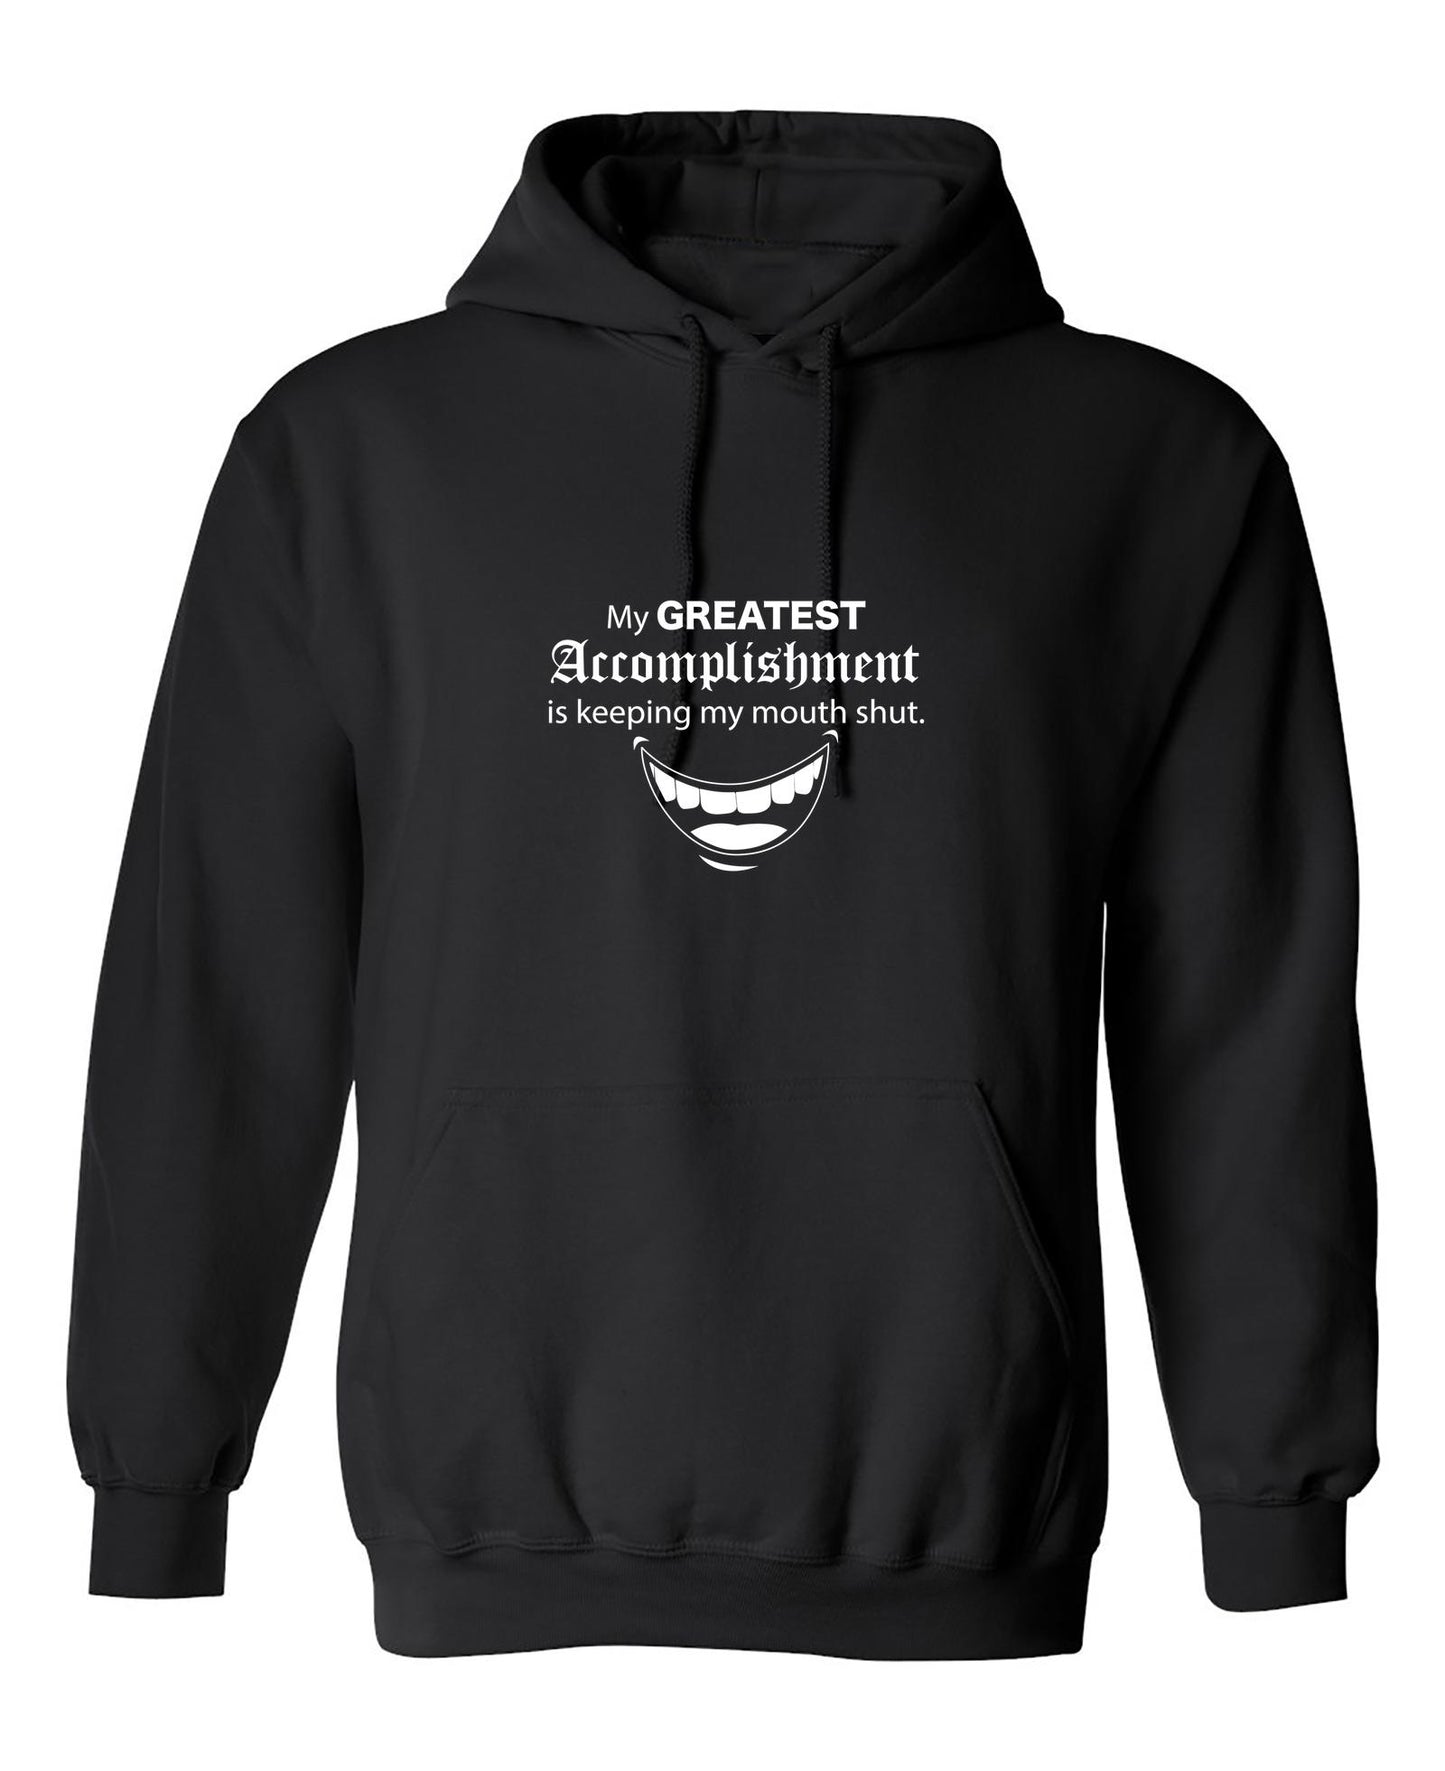 Funny T-Shirts design "My Greatest Accomplishment Is Keeping My Mouth Shut"